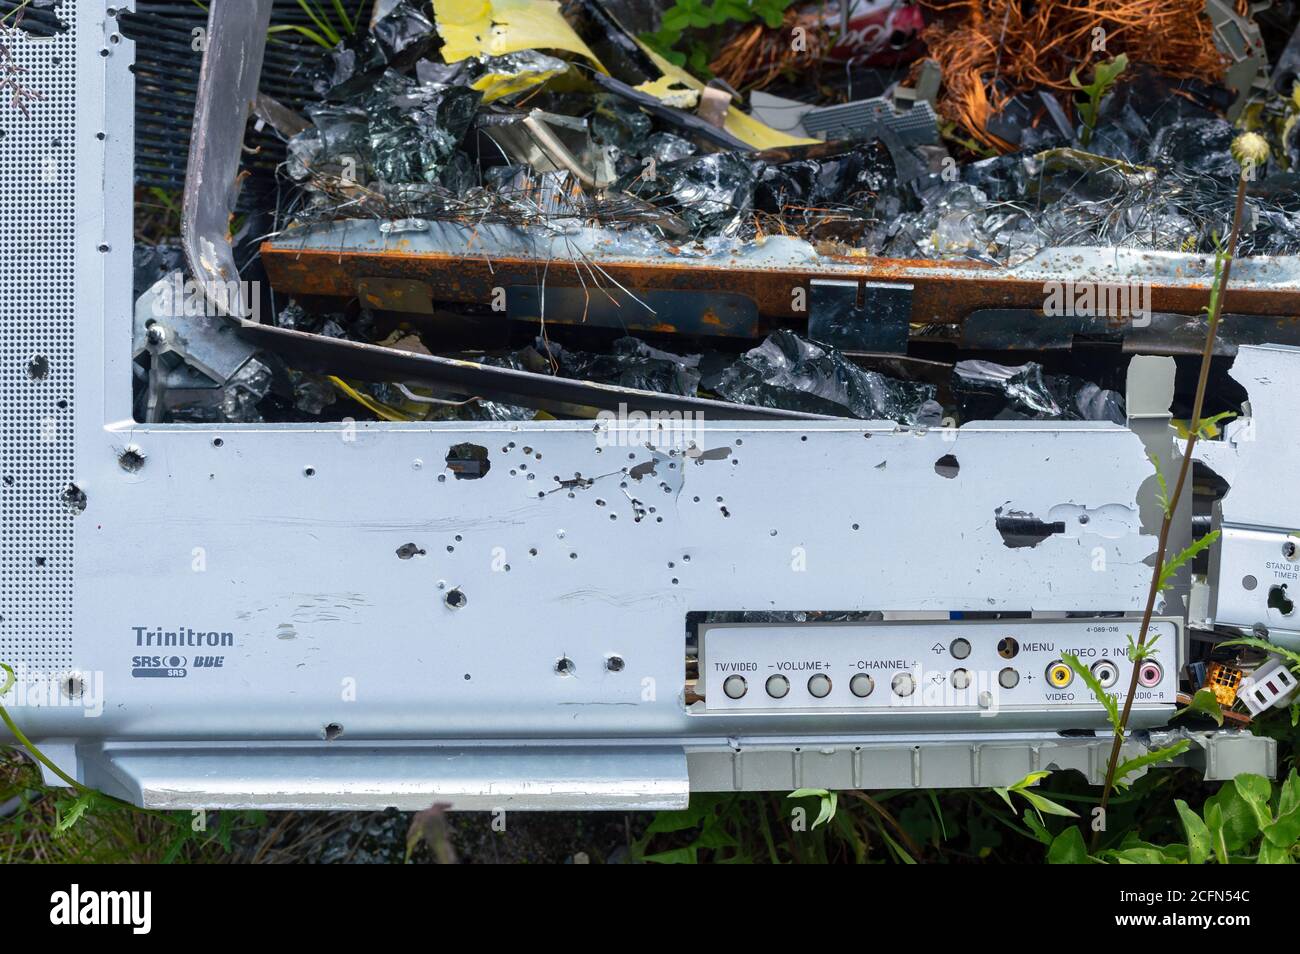 British Columbia, Canada - June 24, 2016: A smashed television on the ground Stock Photo